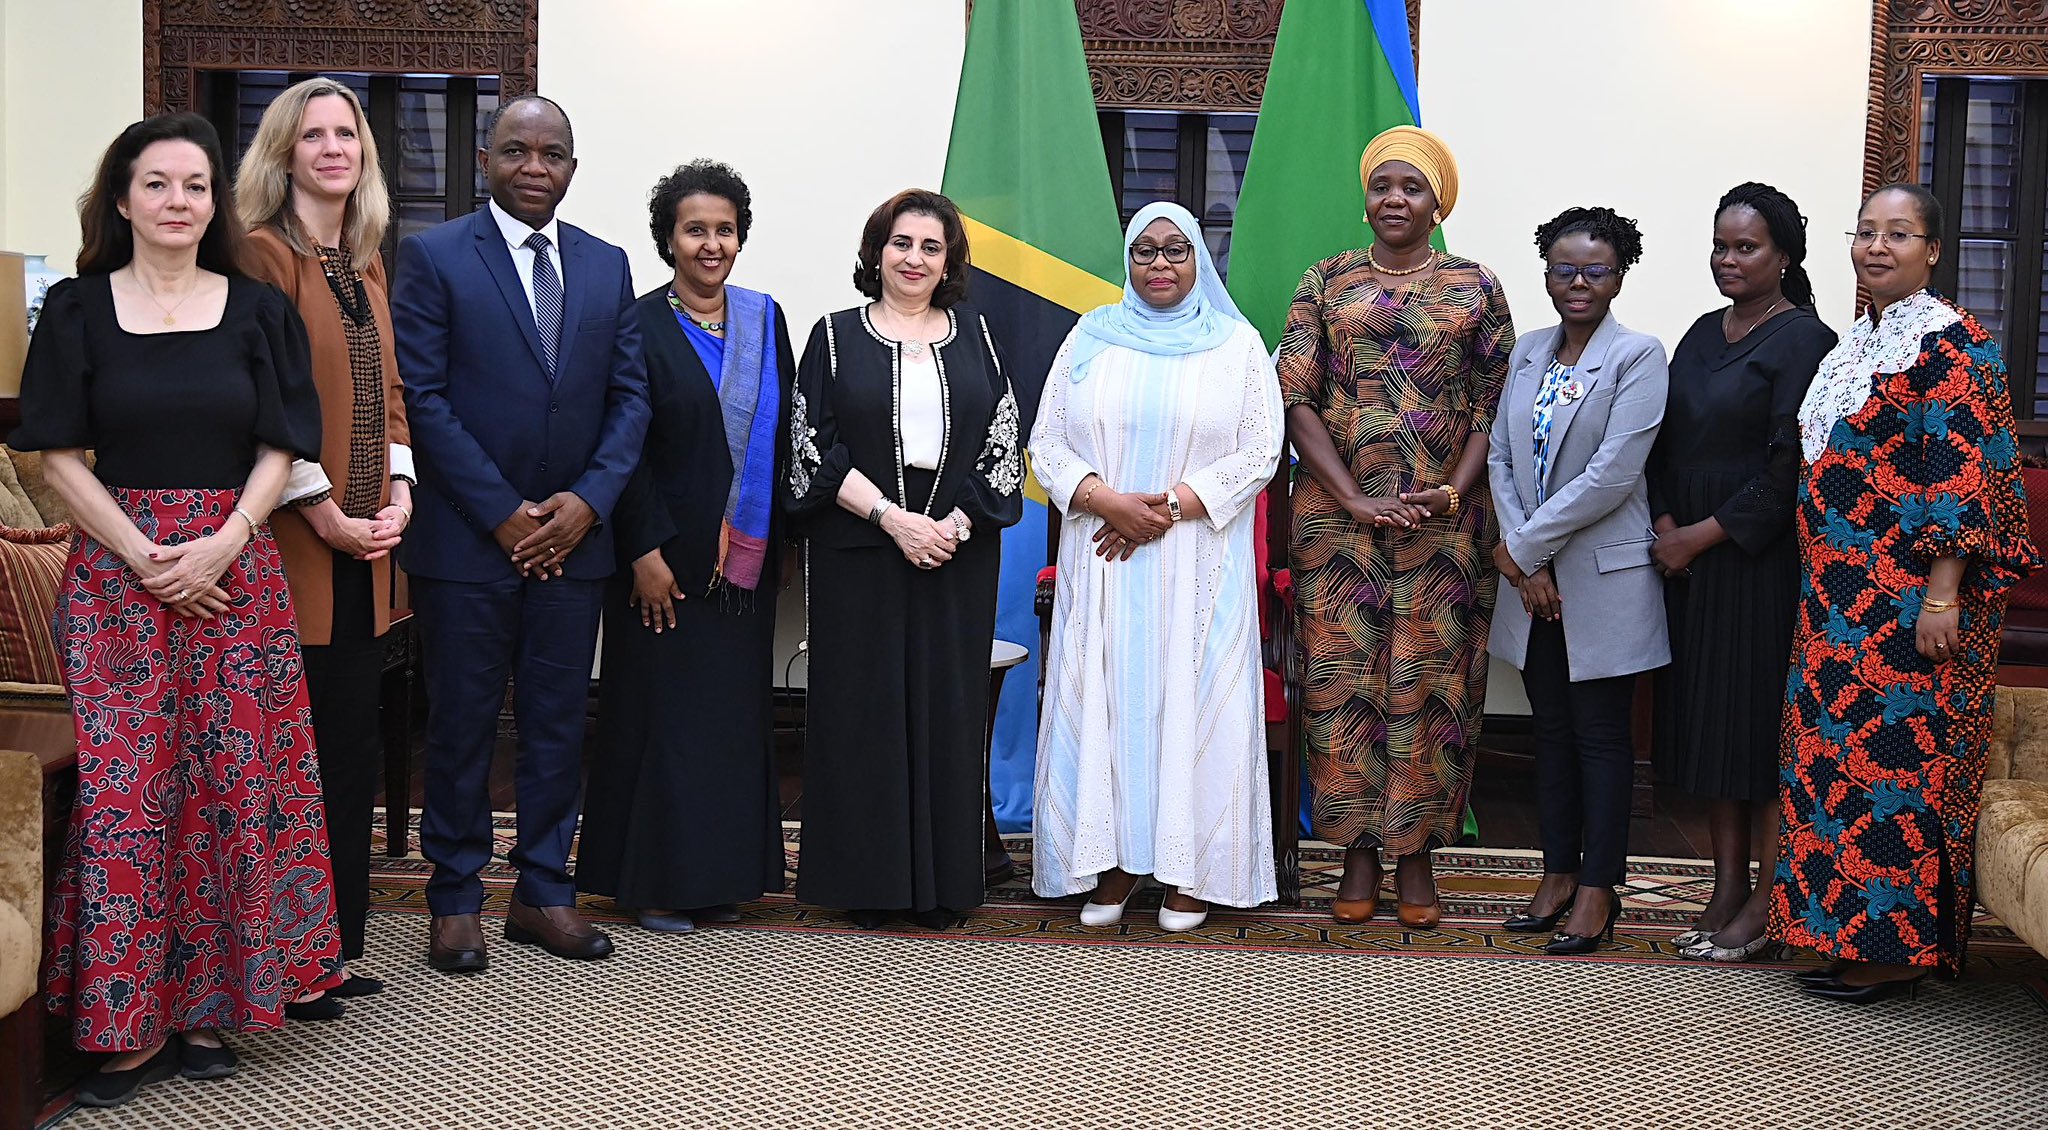 UN Women Executive Director with President Samia Suluhu Hassan, Dorothy Gwajima, Tanzanian Minister of Health, Community Development, Gender, Elders and Children, and UN Women delegation.  Photo: Courtesy of Tanzania State House